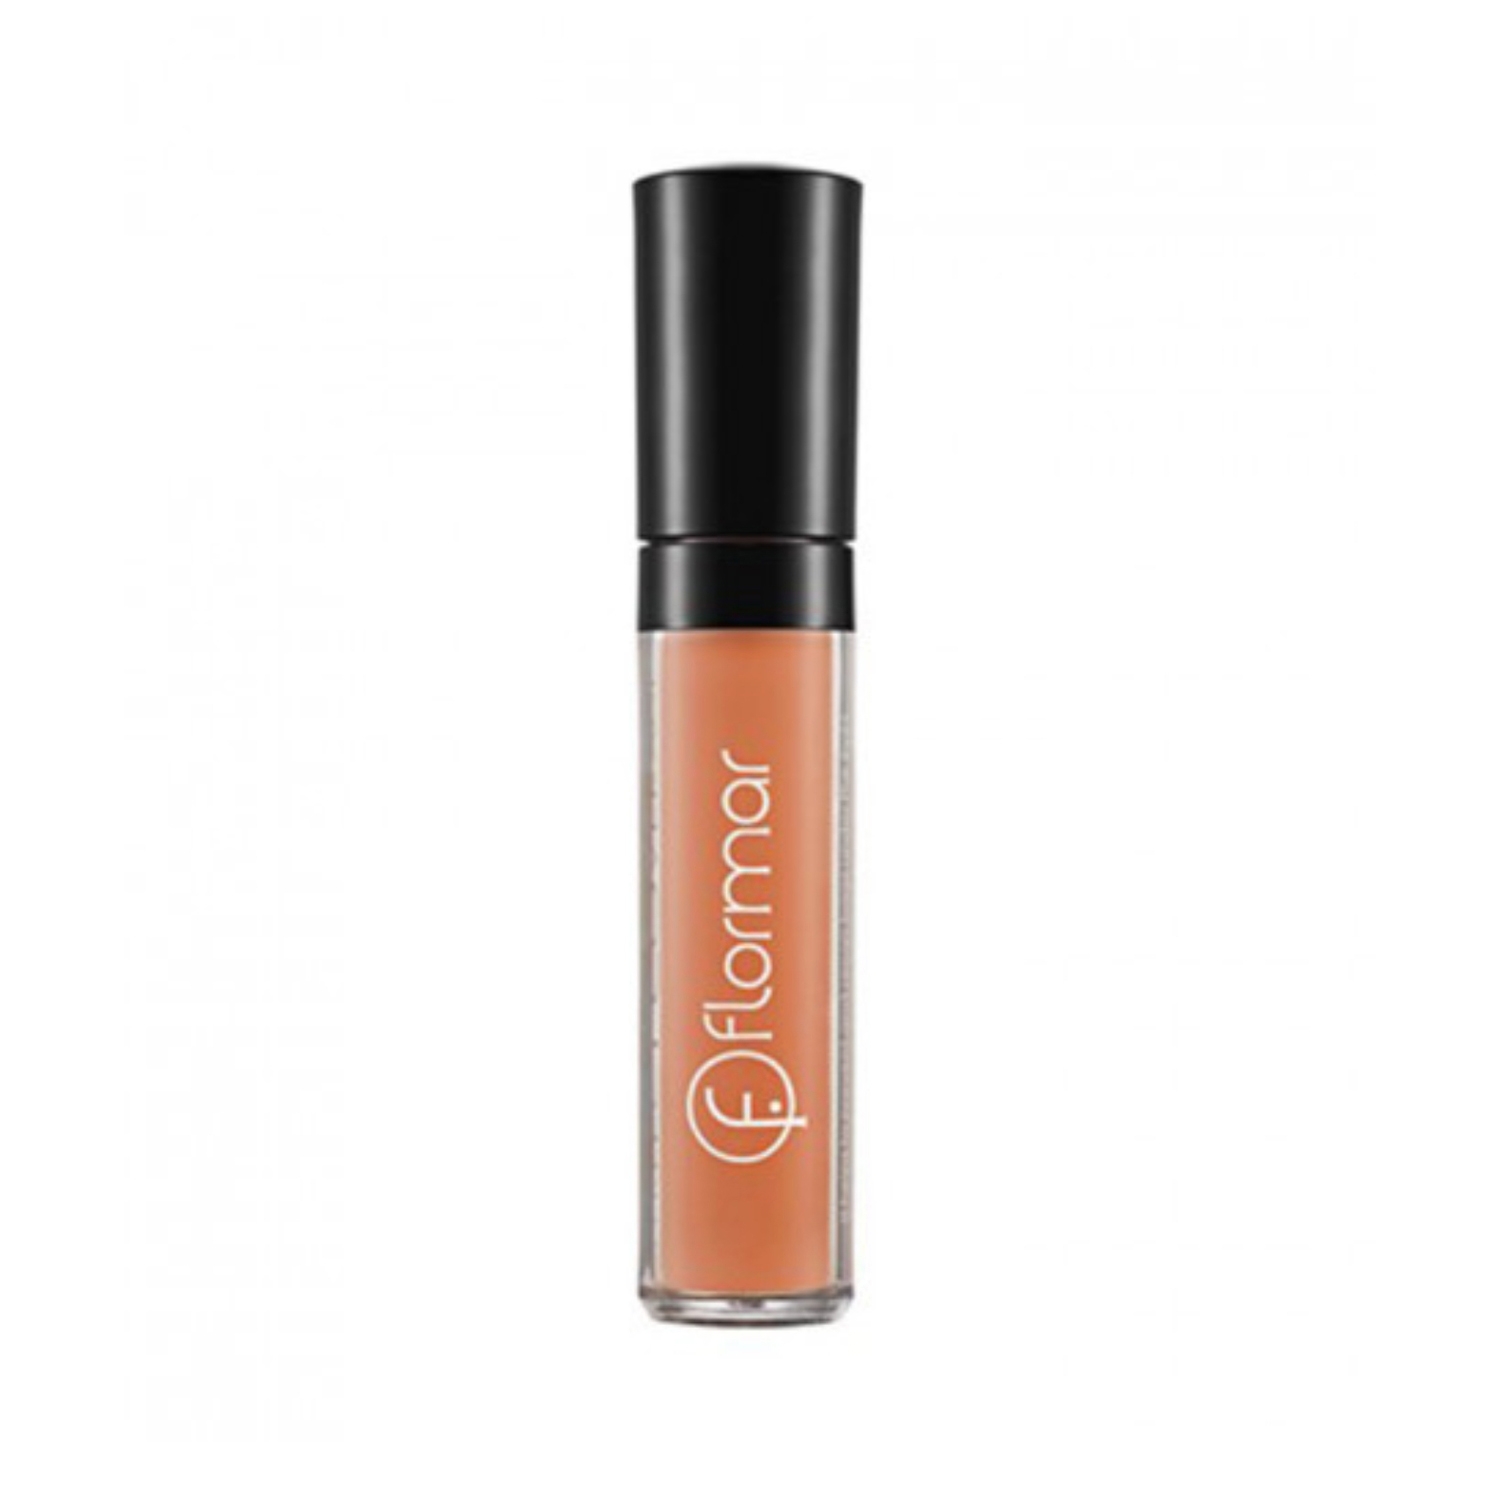 Pretty By Flormar Cover Up Liquid Concealer Soft Beige : Buy